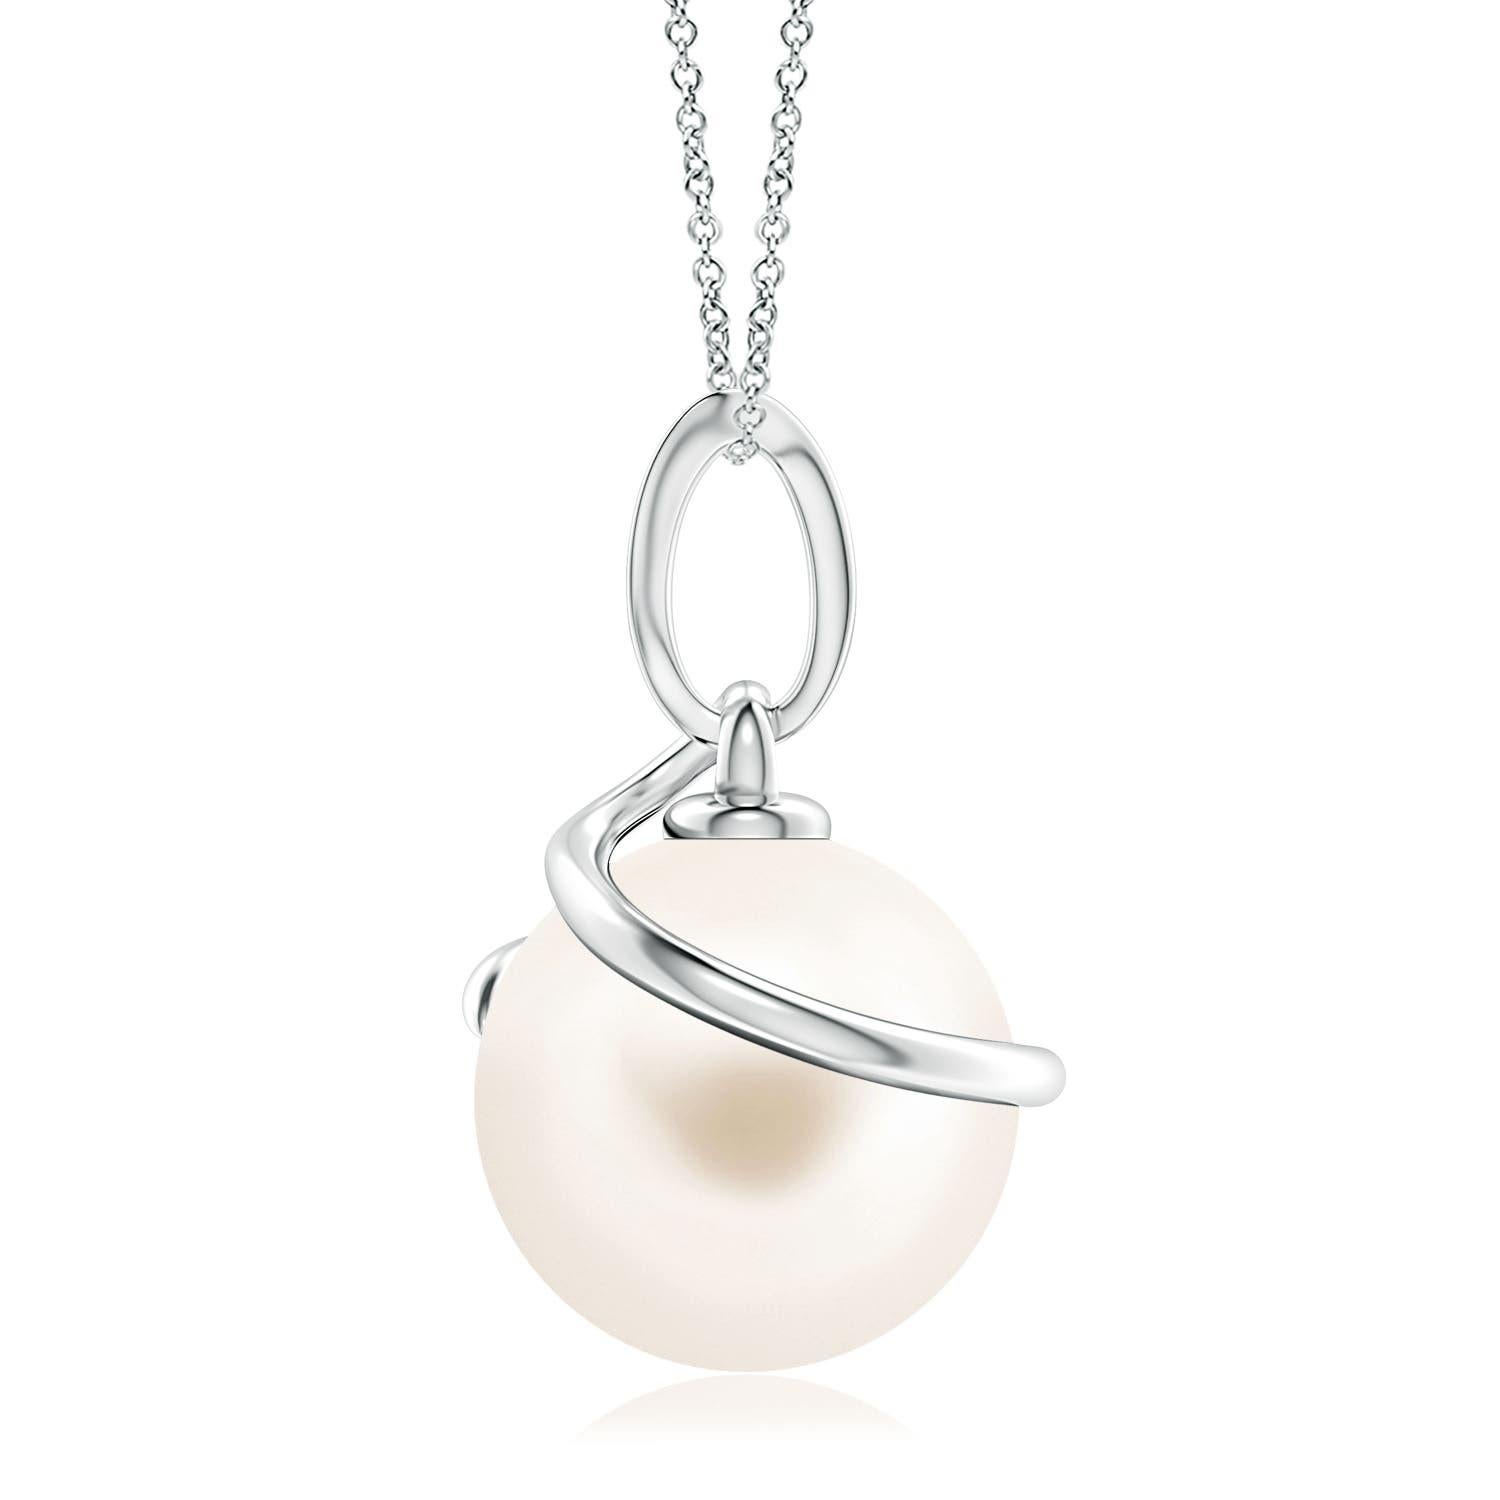 Give an elegant twist to your looks with this Freshwater cultured pearl pendant, crafted in 14k white gold. The beautiful pearl is wrapped by a spiral metal loop and linked to a diamond-studded bale.
Freshwater Cultured Pearl is the Birthstone for